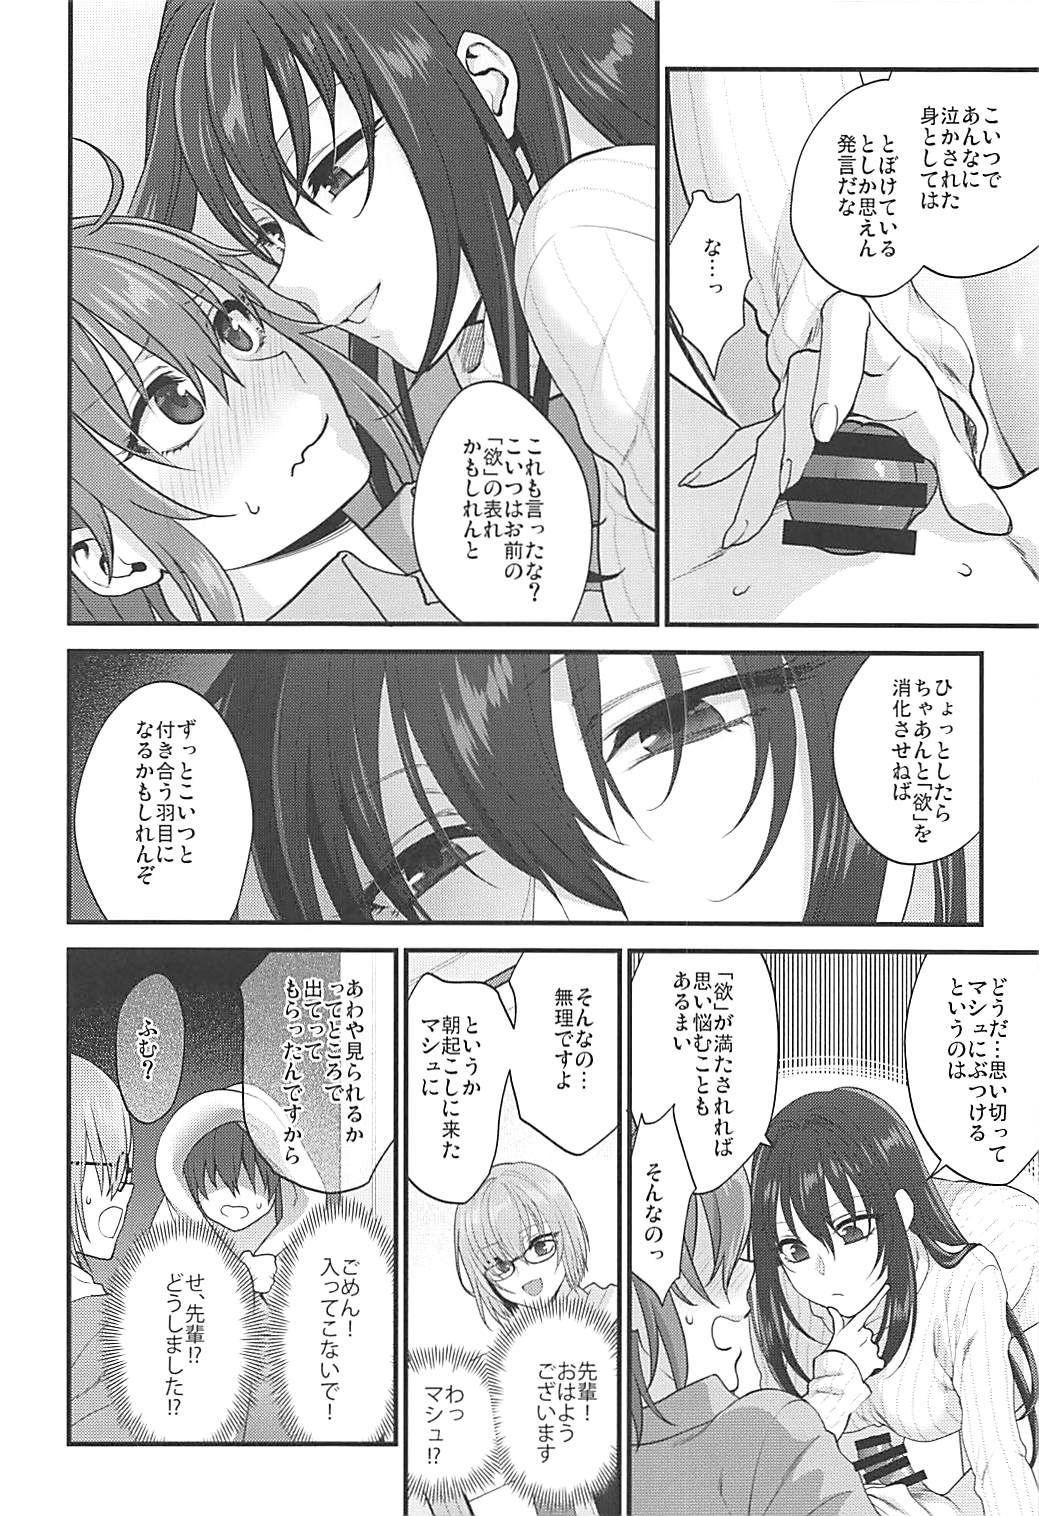 Groupsex In my room. - Fate grand order Gay Ass Fucking - Page 7